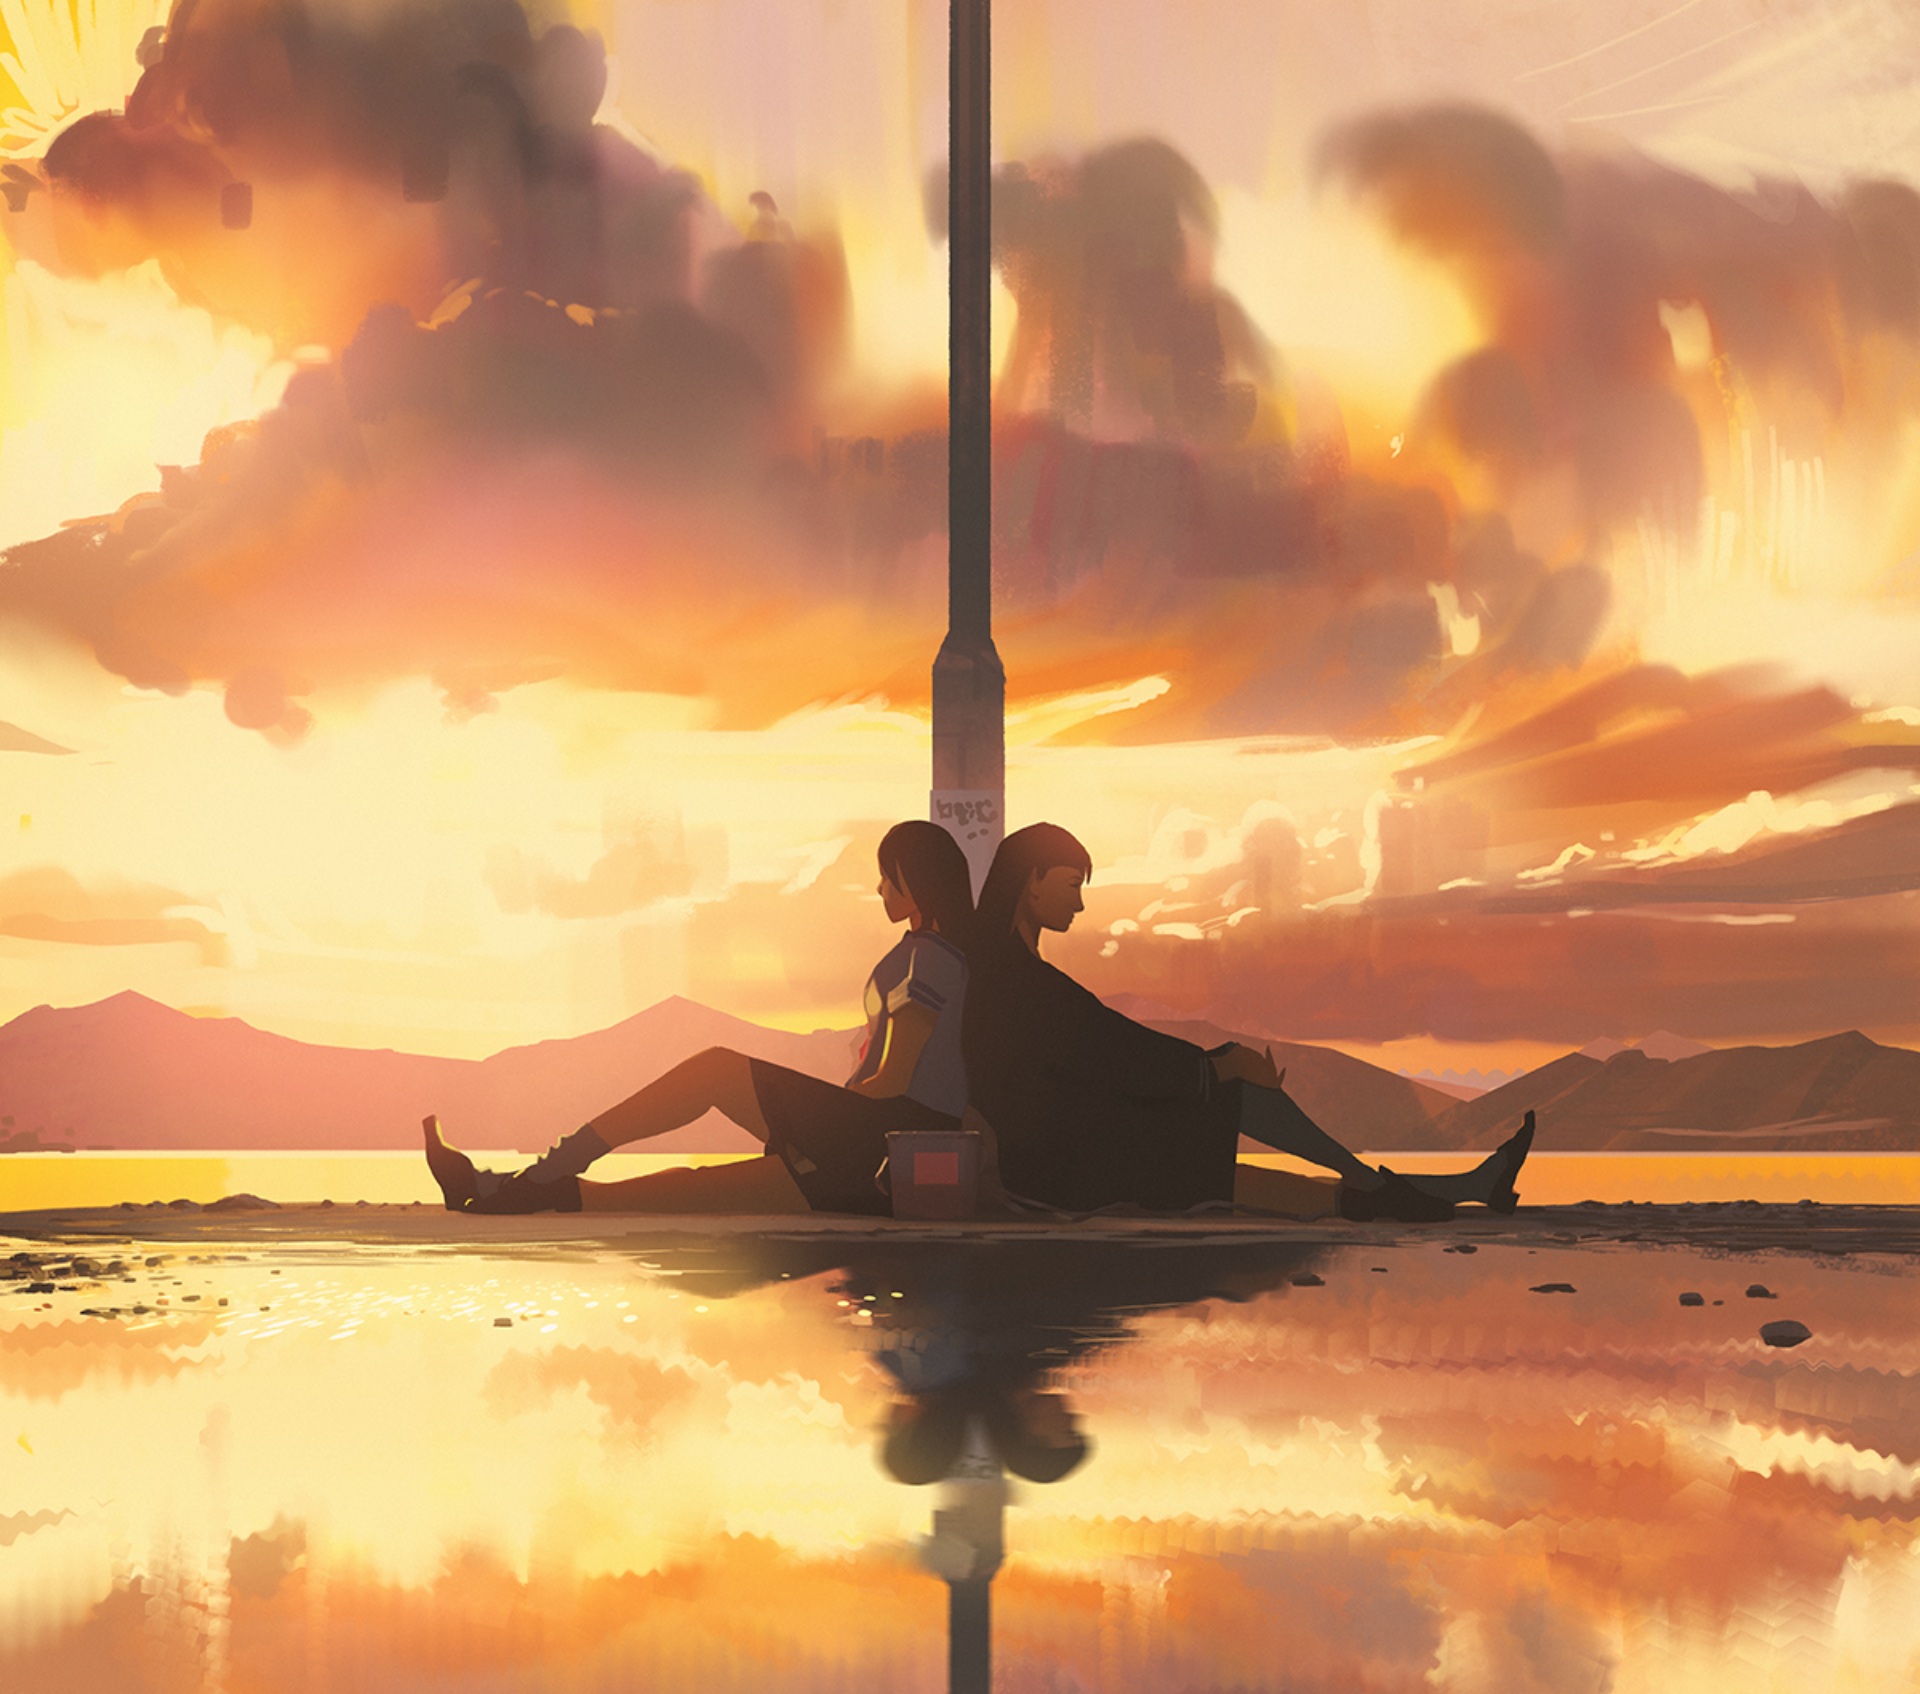 Two Sides by Atey Majeed Ghailan